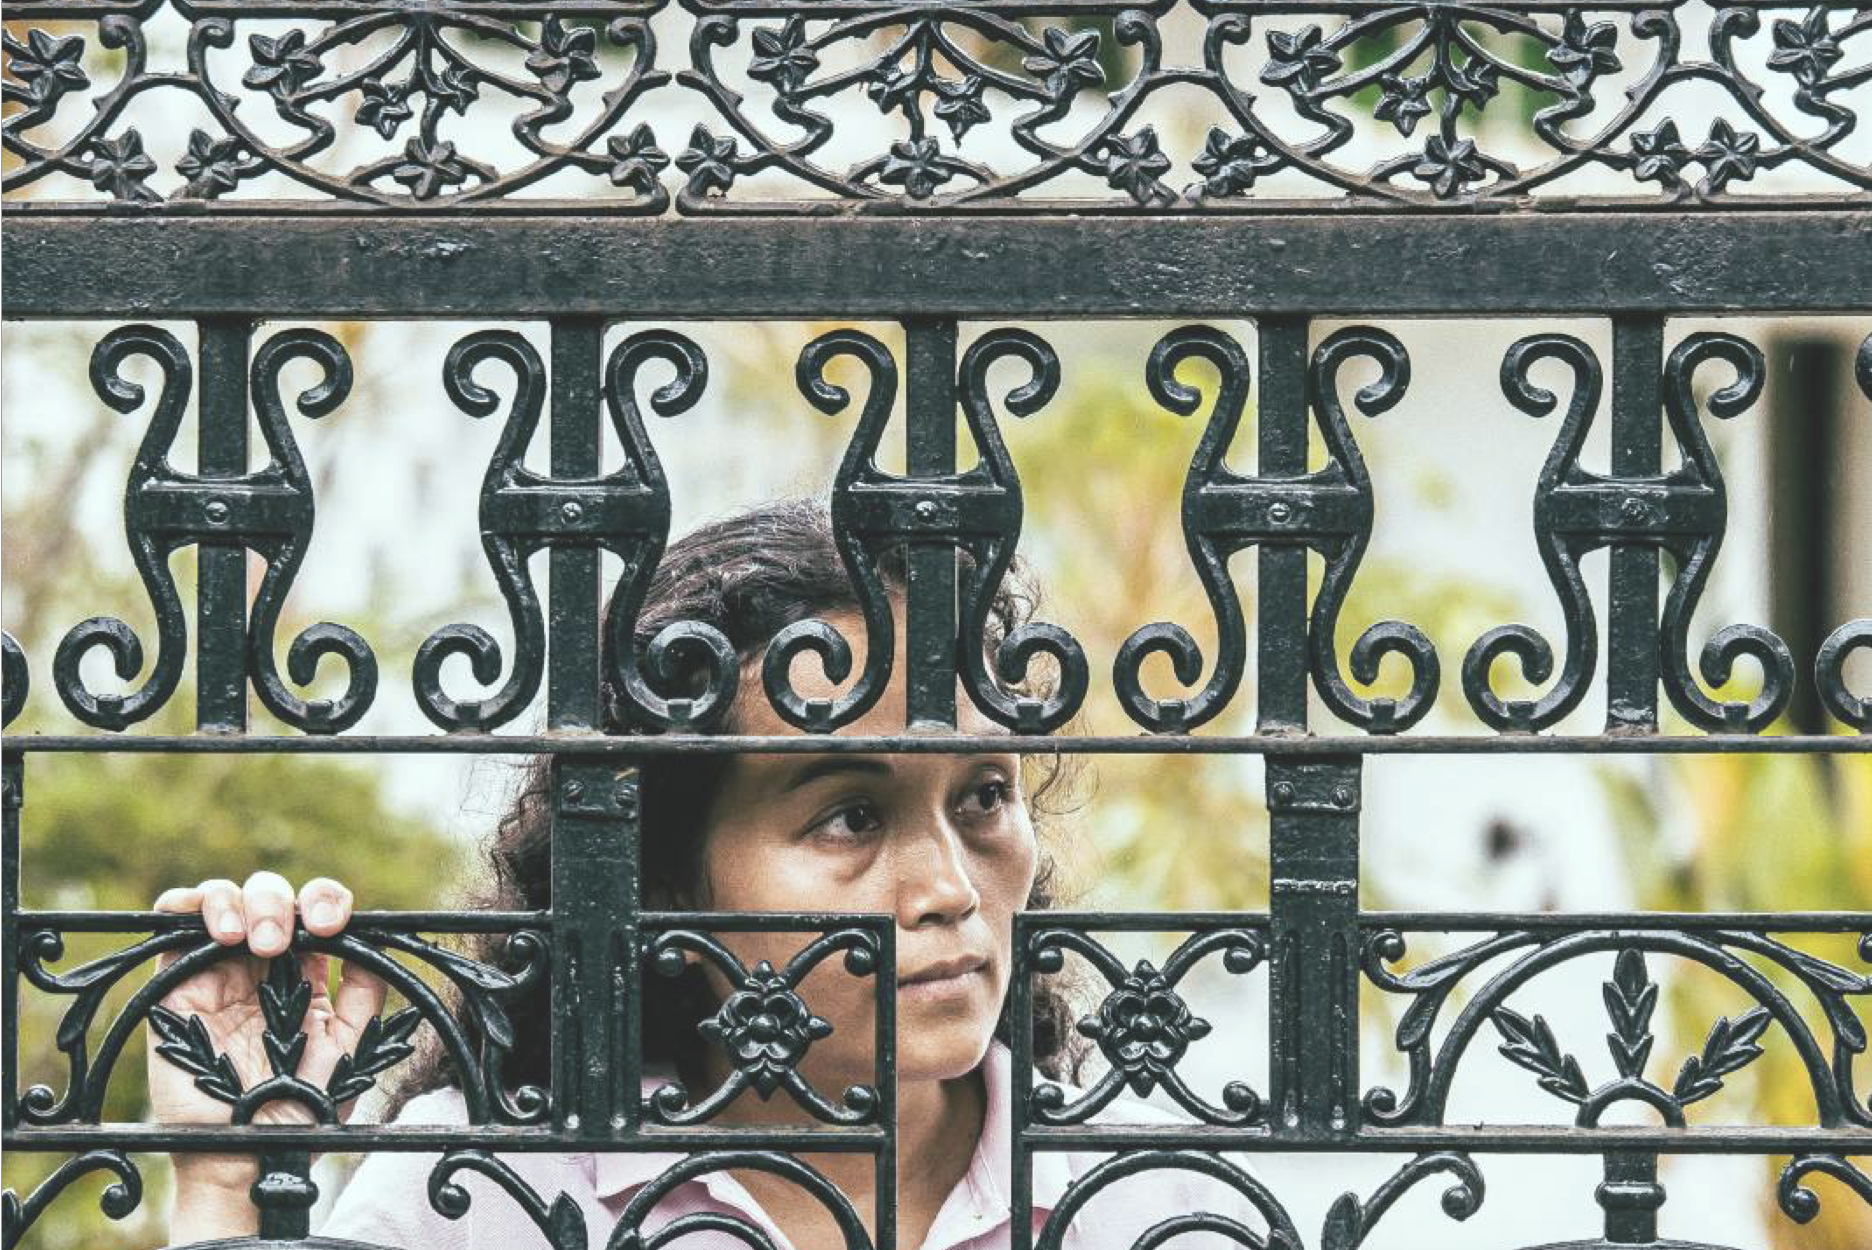 A woman behind a tall, ornate iron fence looks through the bars.